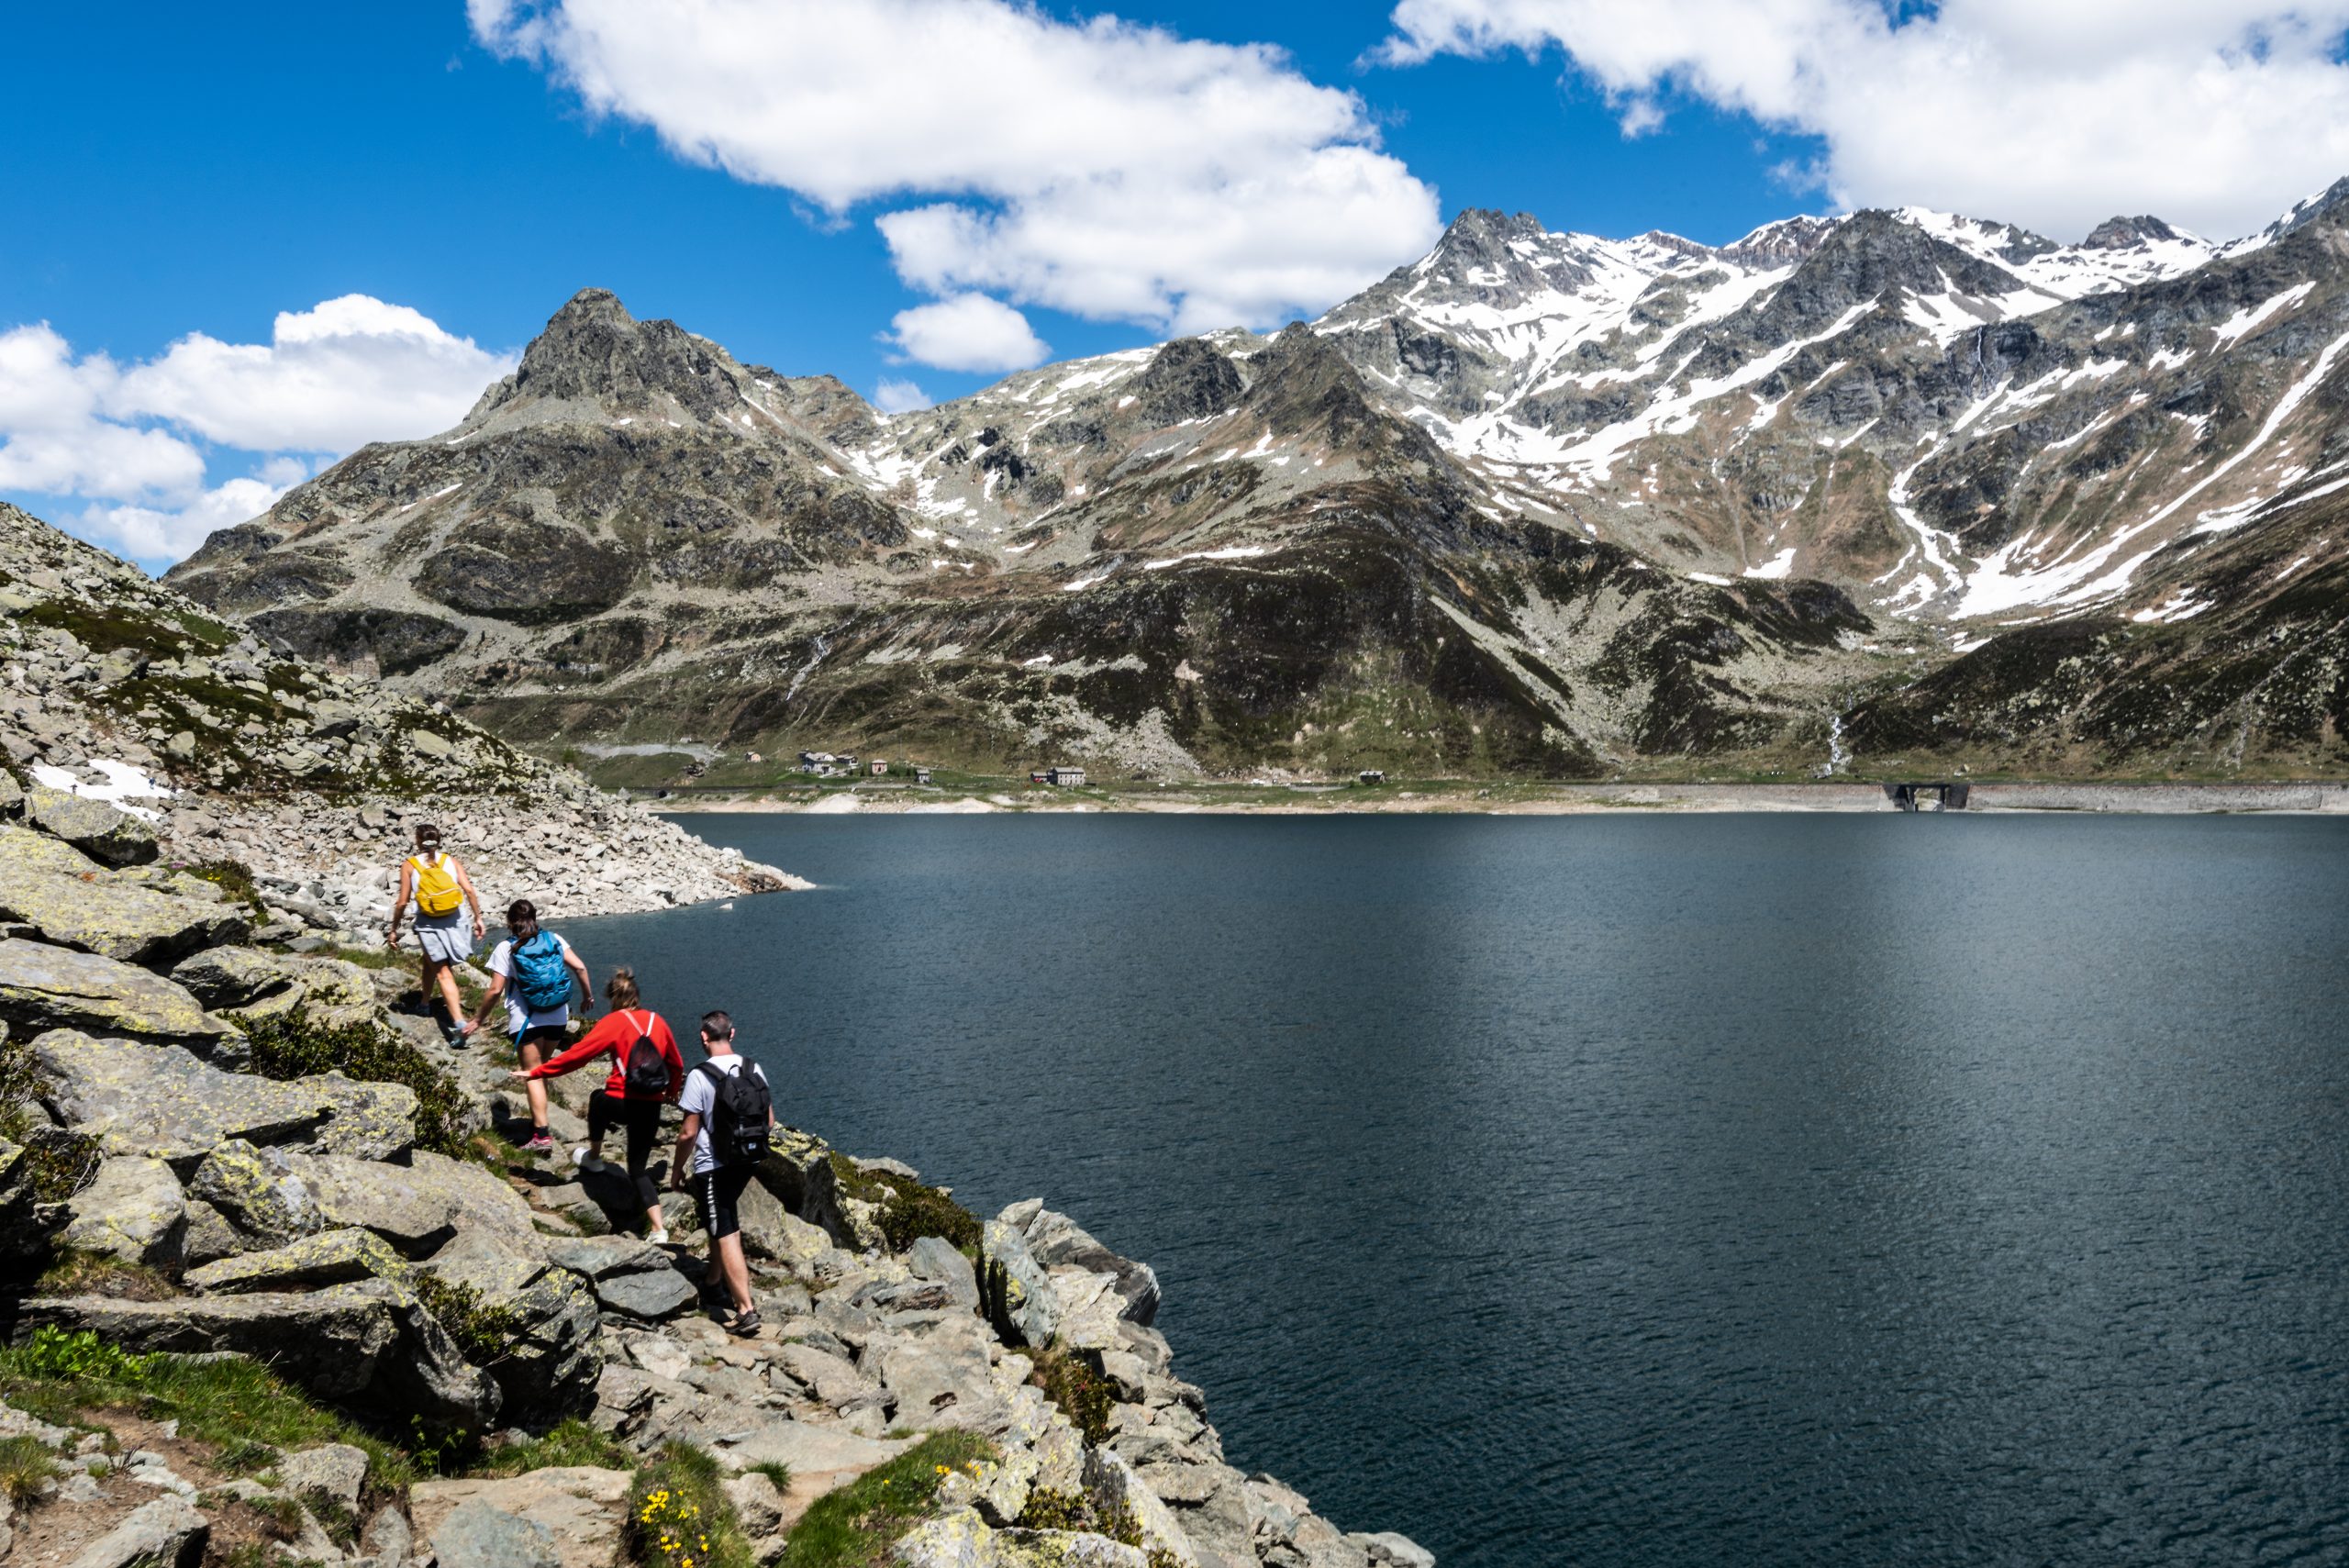 Via Spluga: Hiking through the Swiss and Italian Alps with Your Family